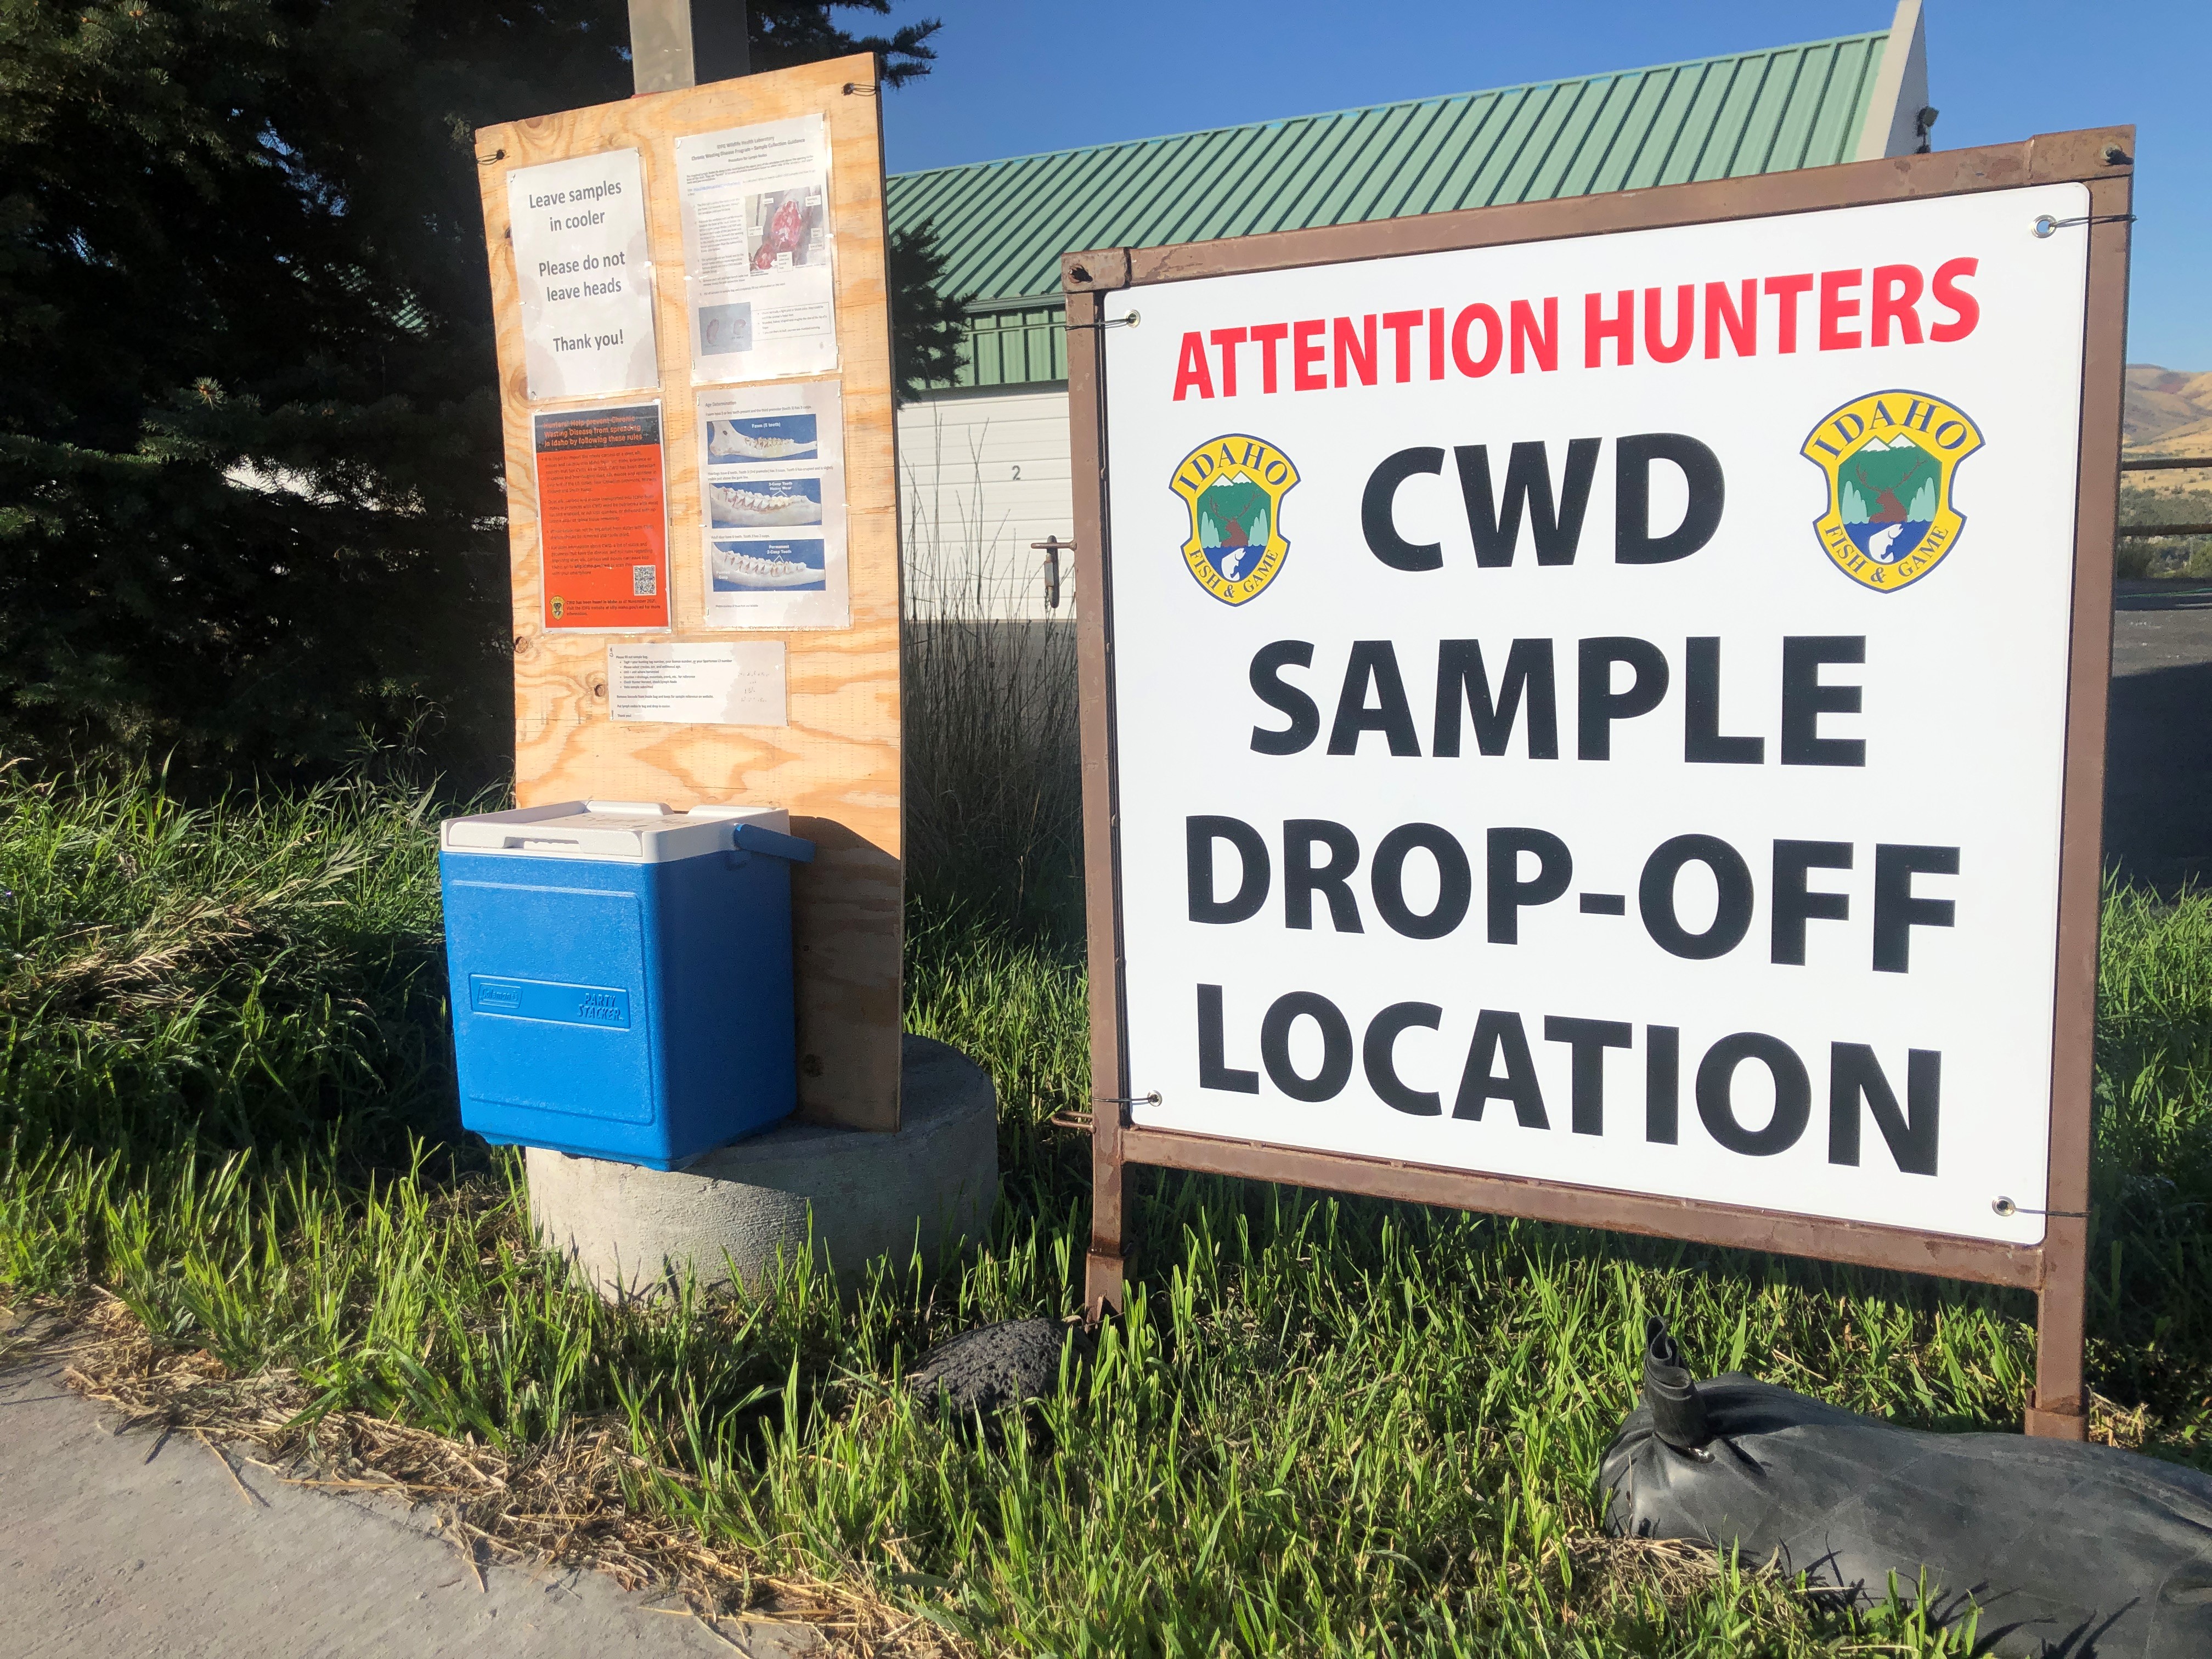 A CWD sample drop-off can and sign.